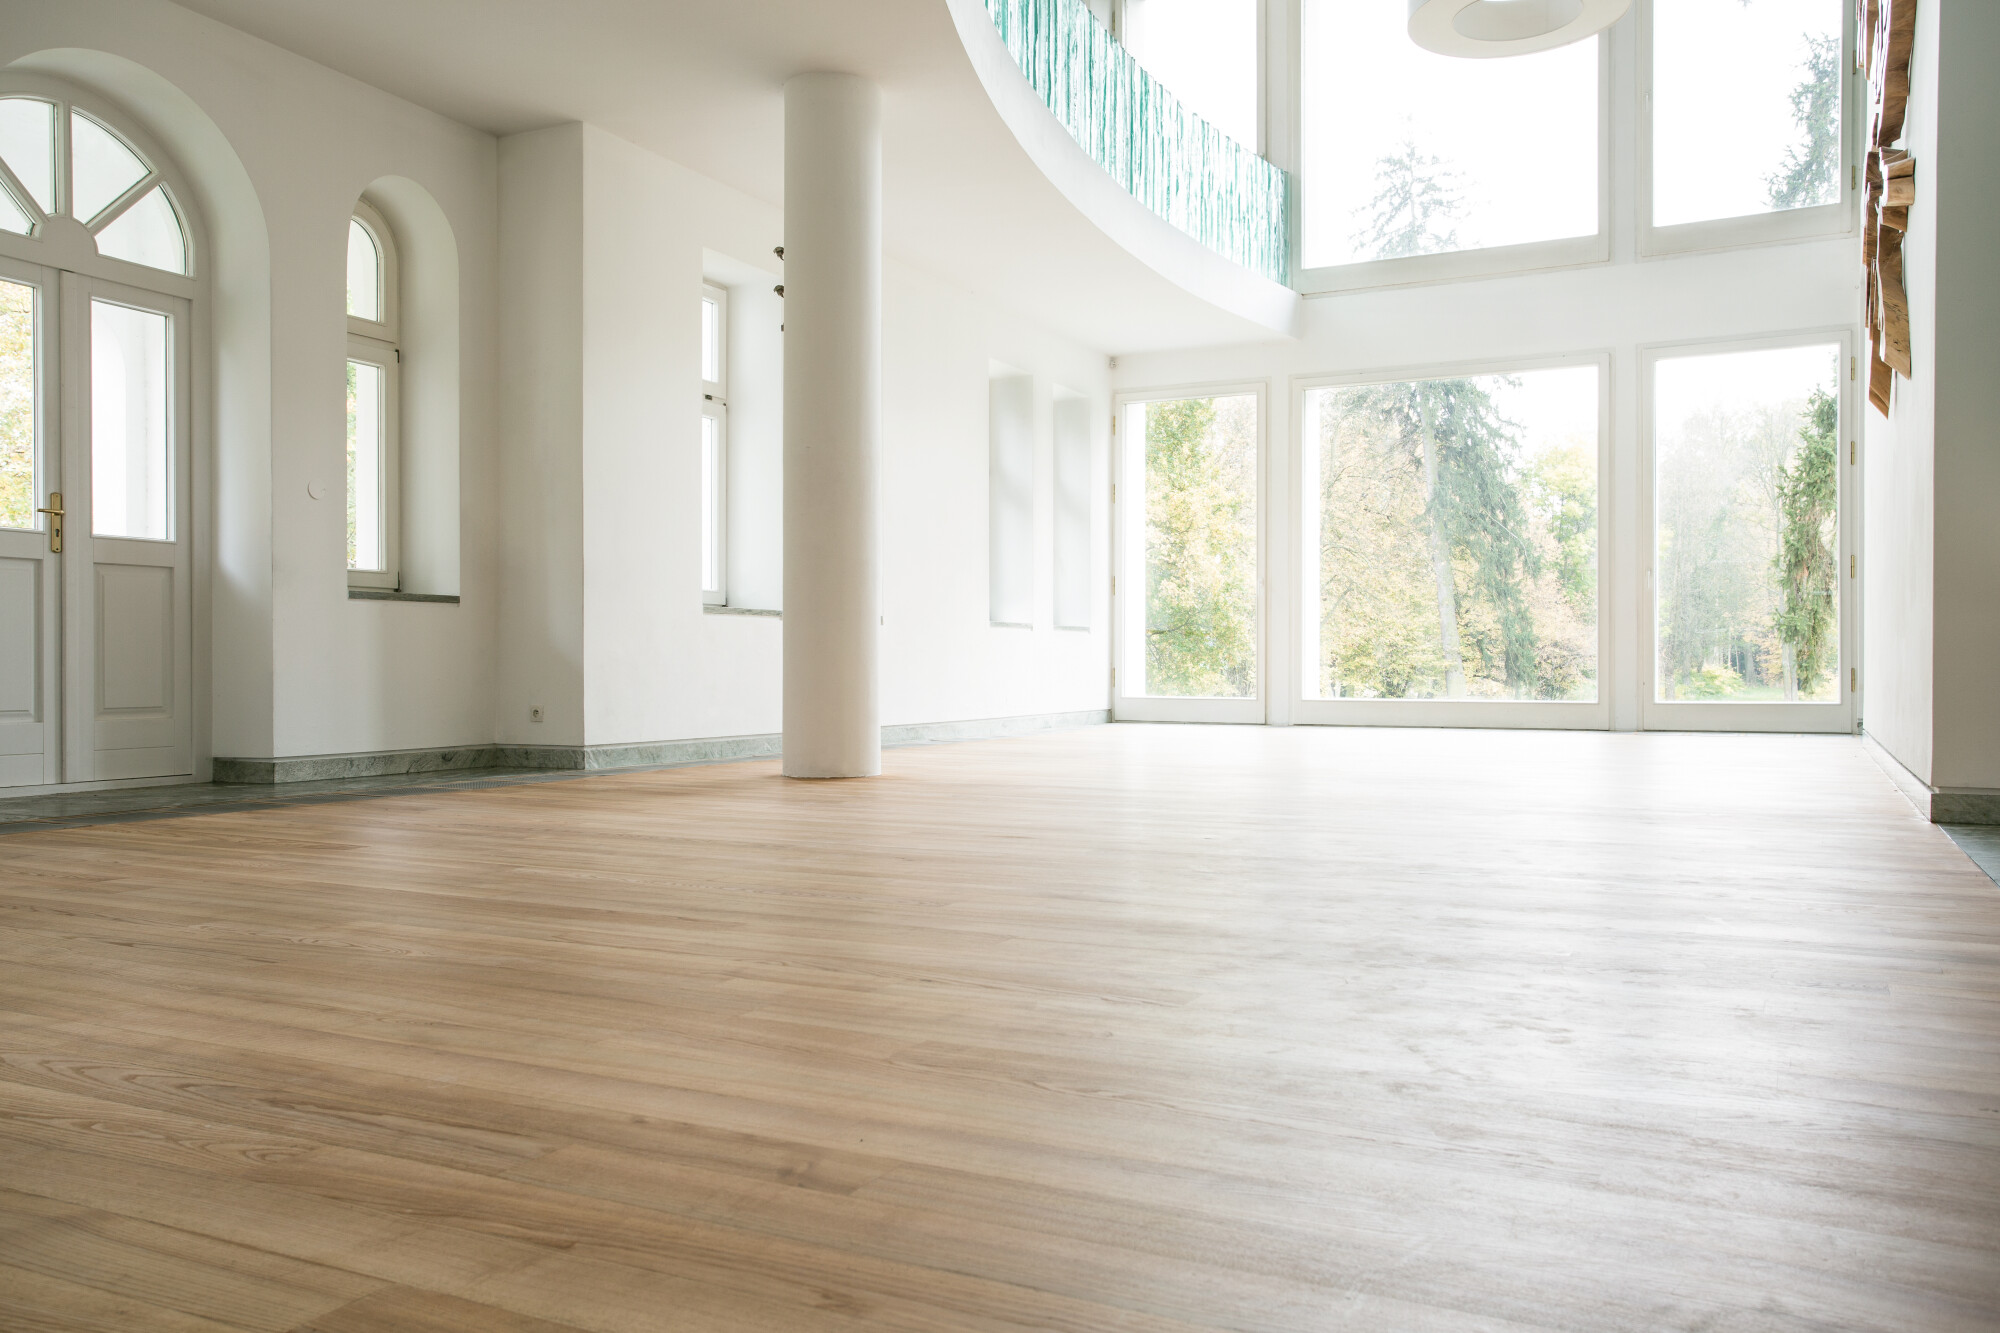 Are you looking for the right staining option for your floors? Click here for five practical tips for choosing the right floor stain for your floors.